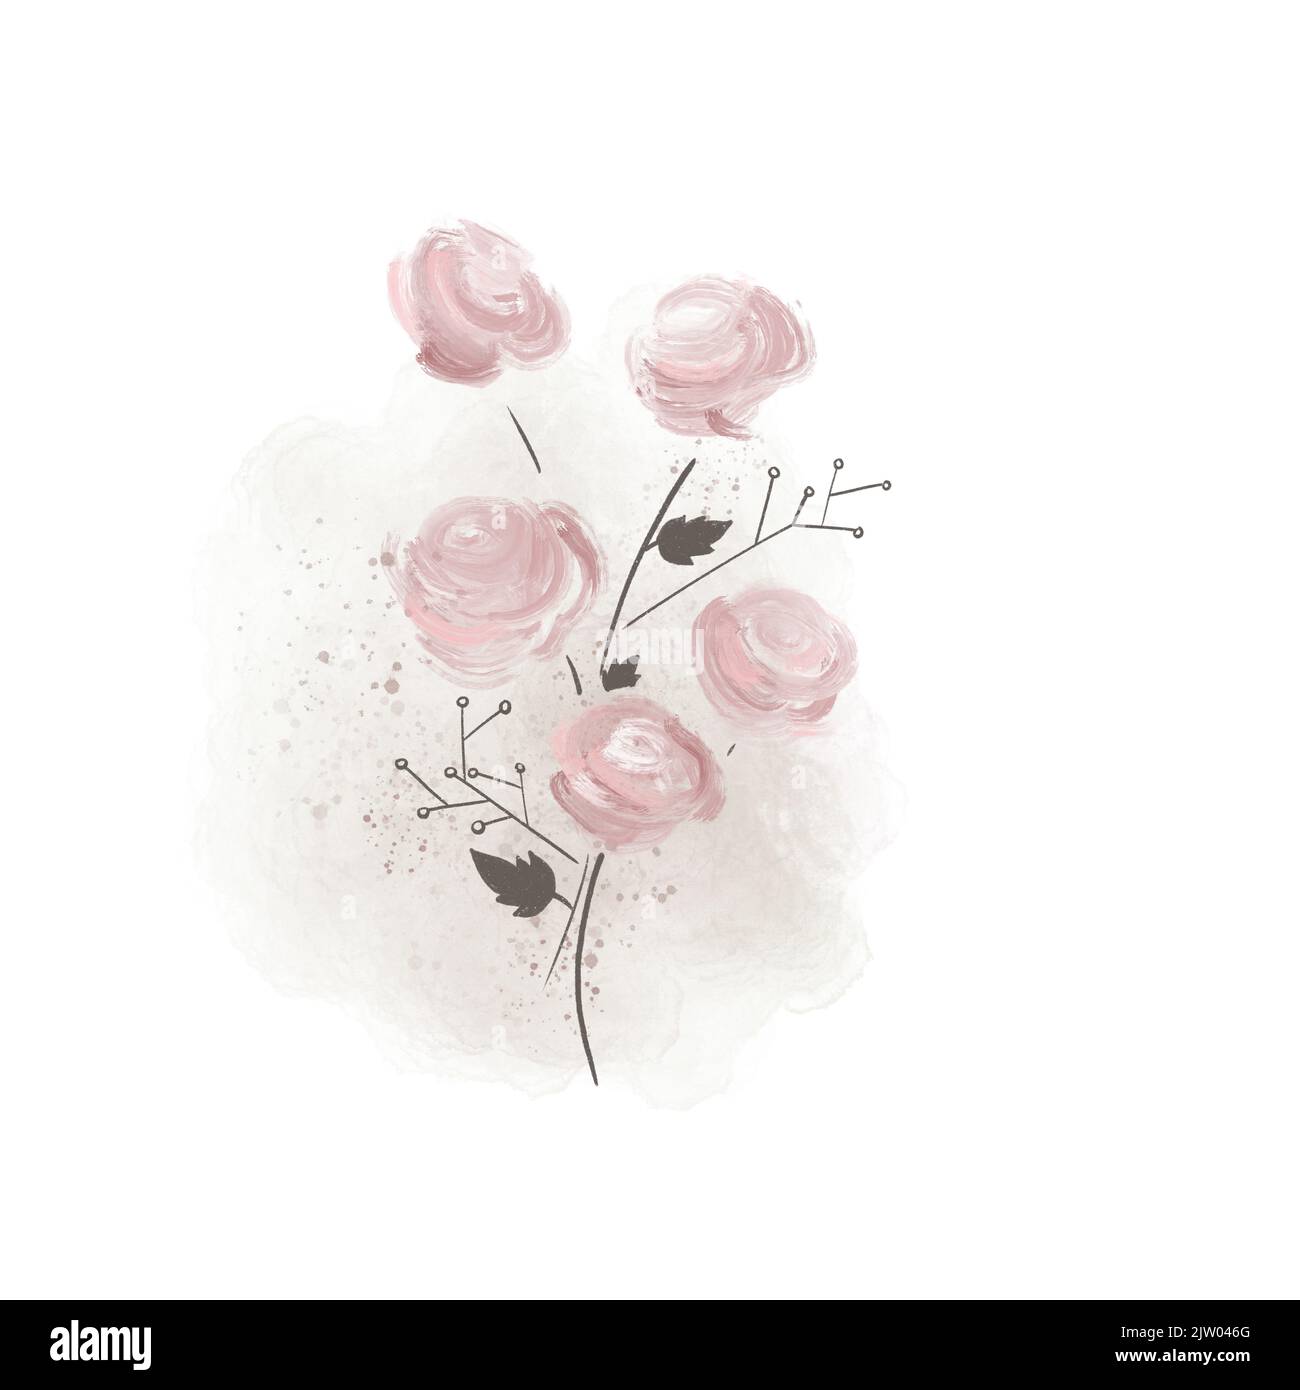 Sweet flowers illustration watercolor and painting Stock Photo